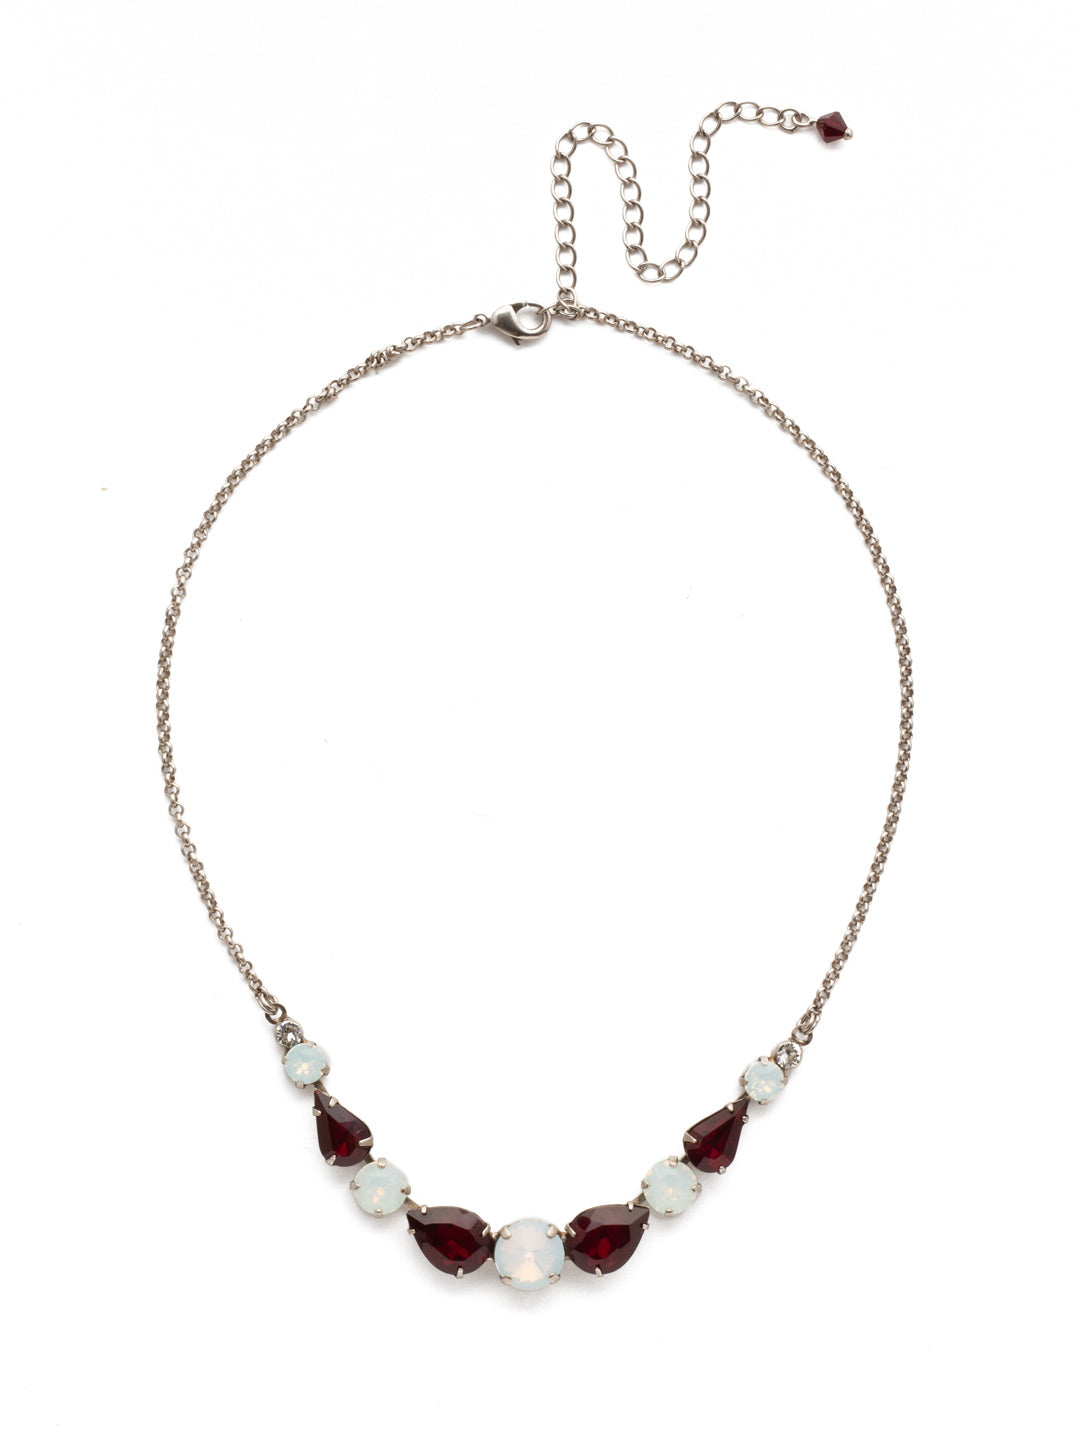 Polished Pear Statement Necklace - NDN74ASCP